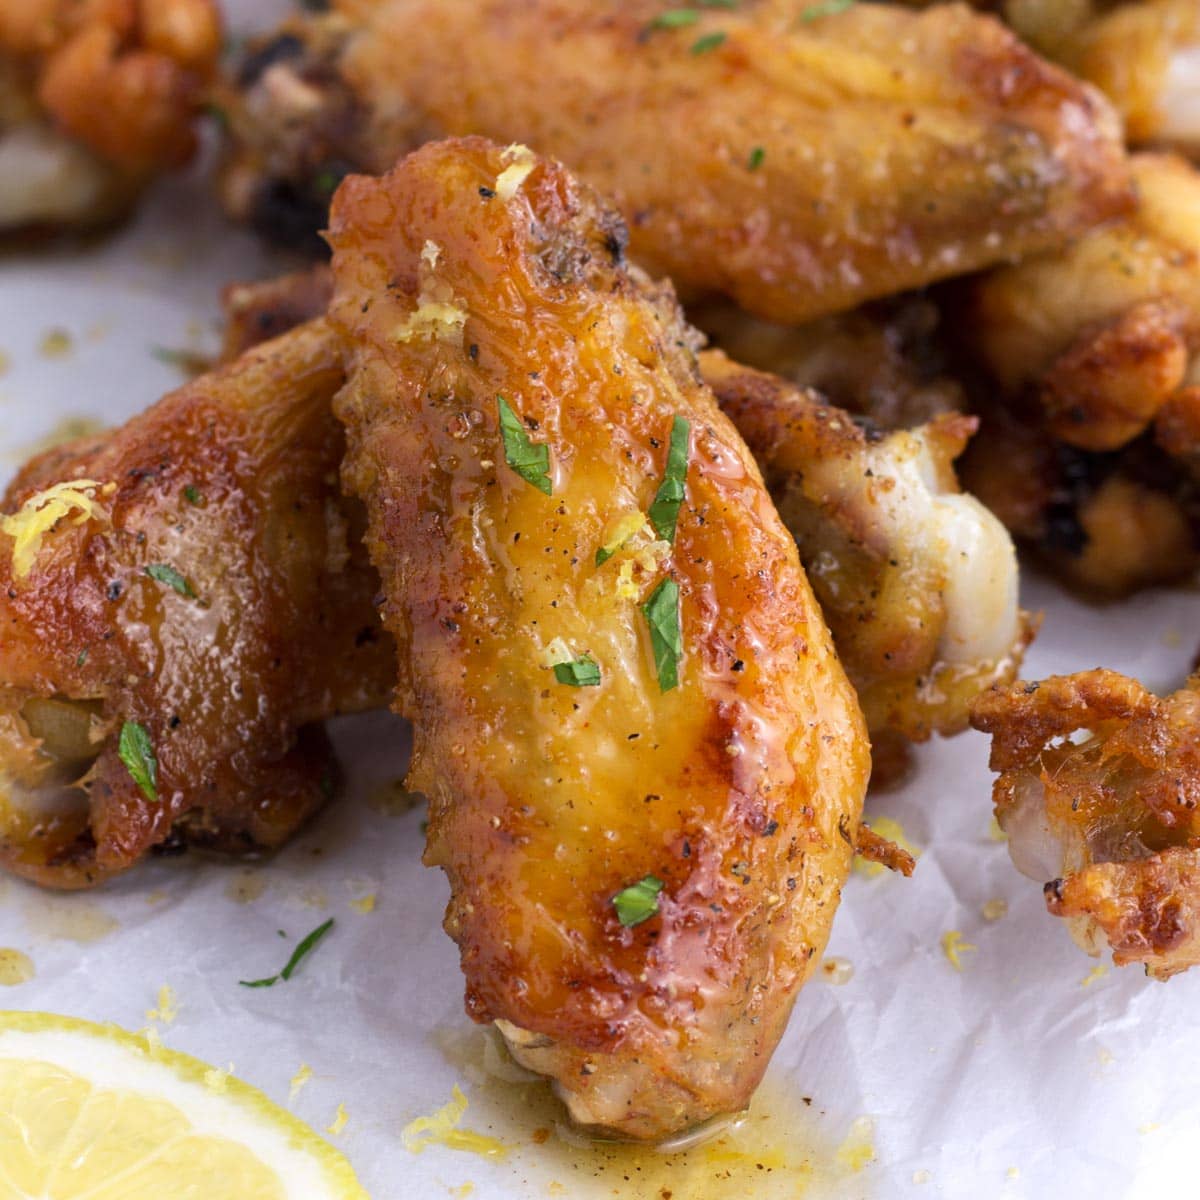 Upclose of crispy baked chicken wings.